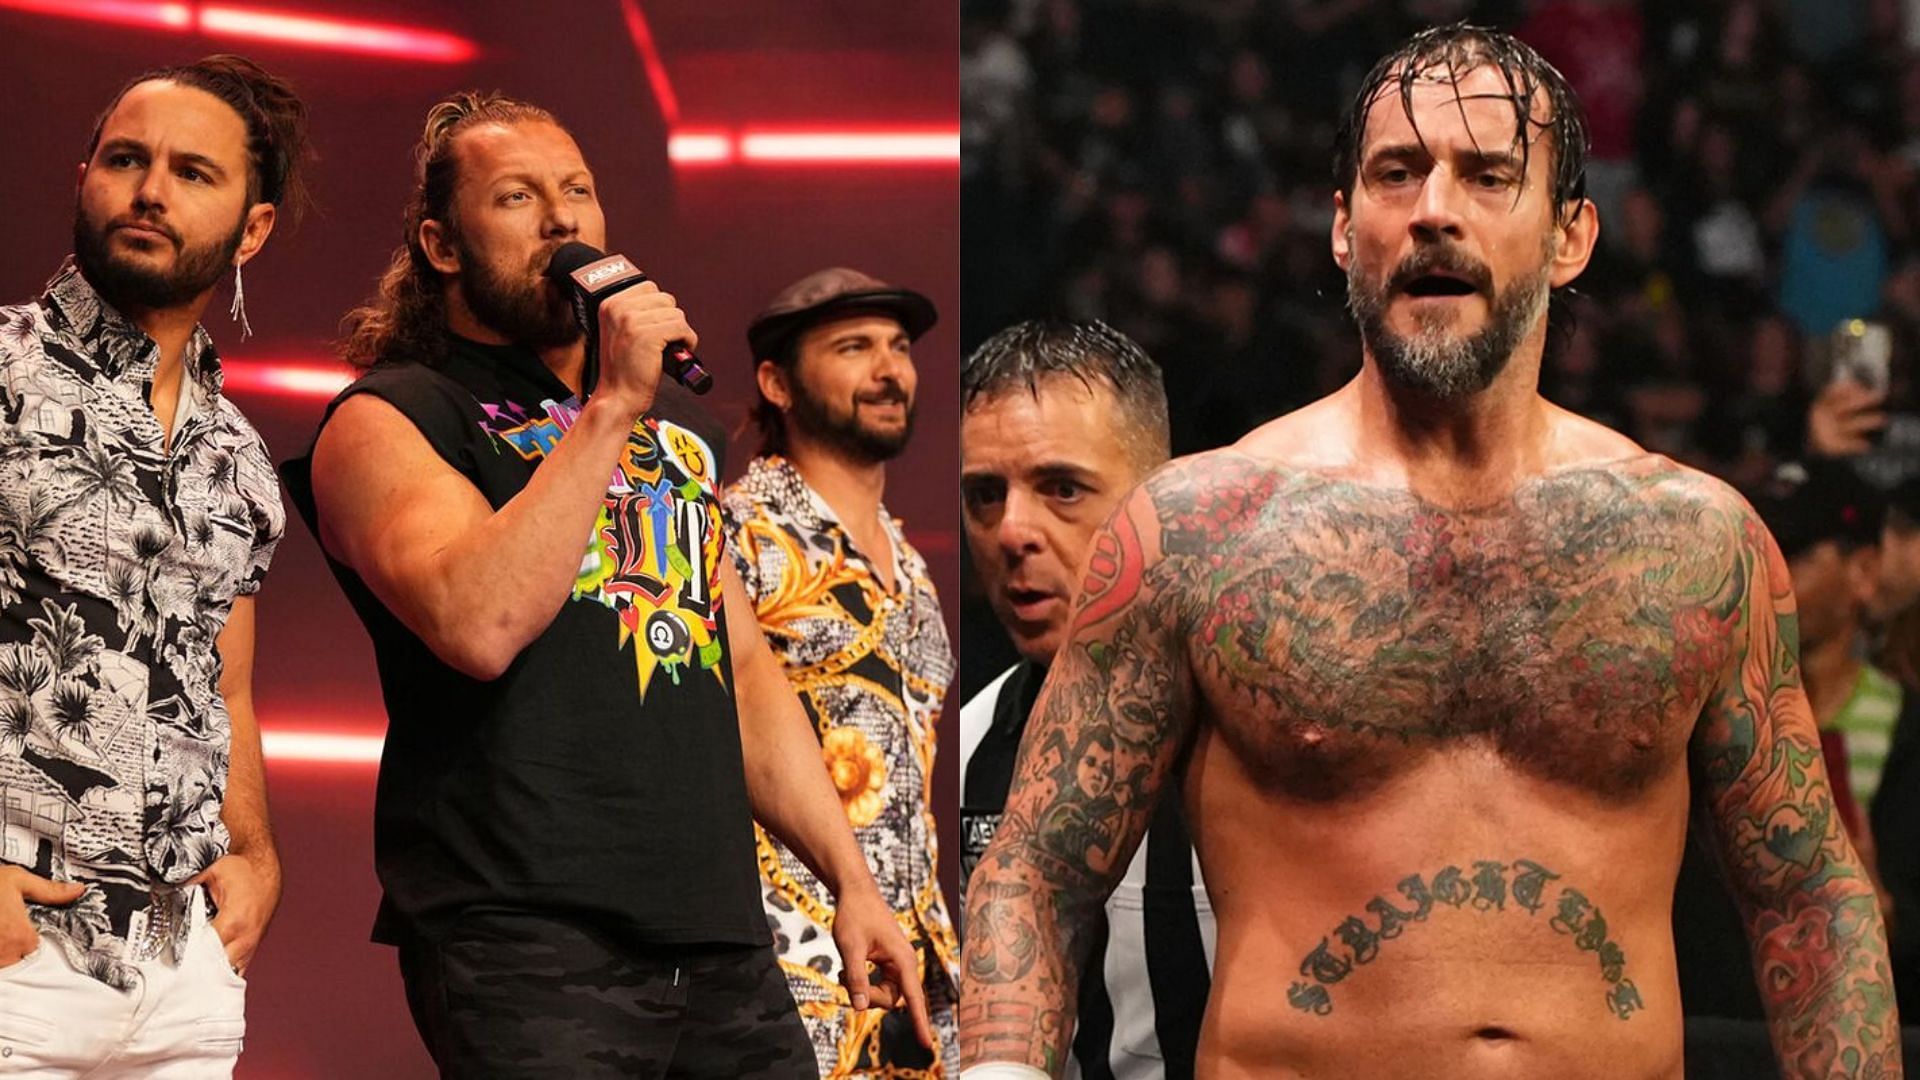 Could this prove that CM Punk was trying to get fired?